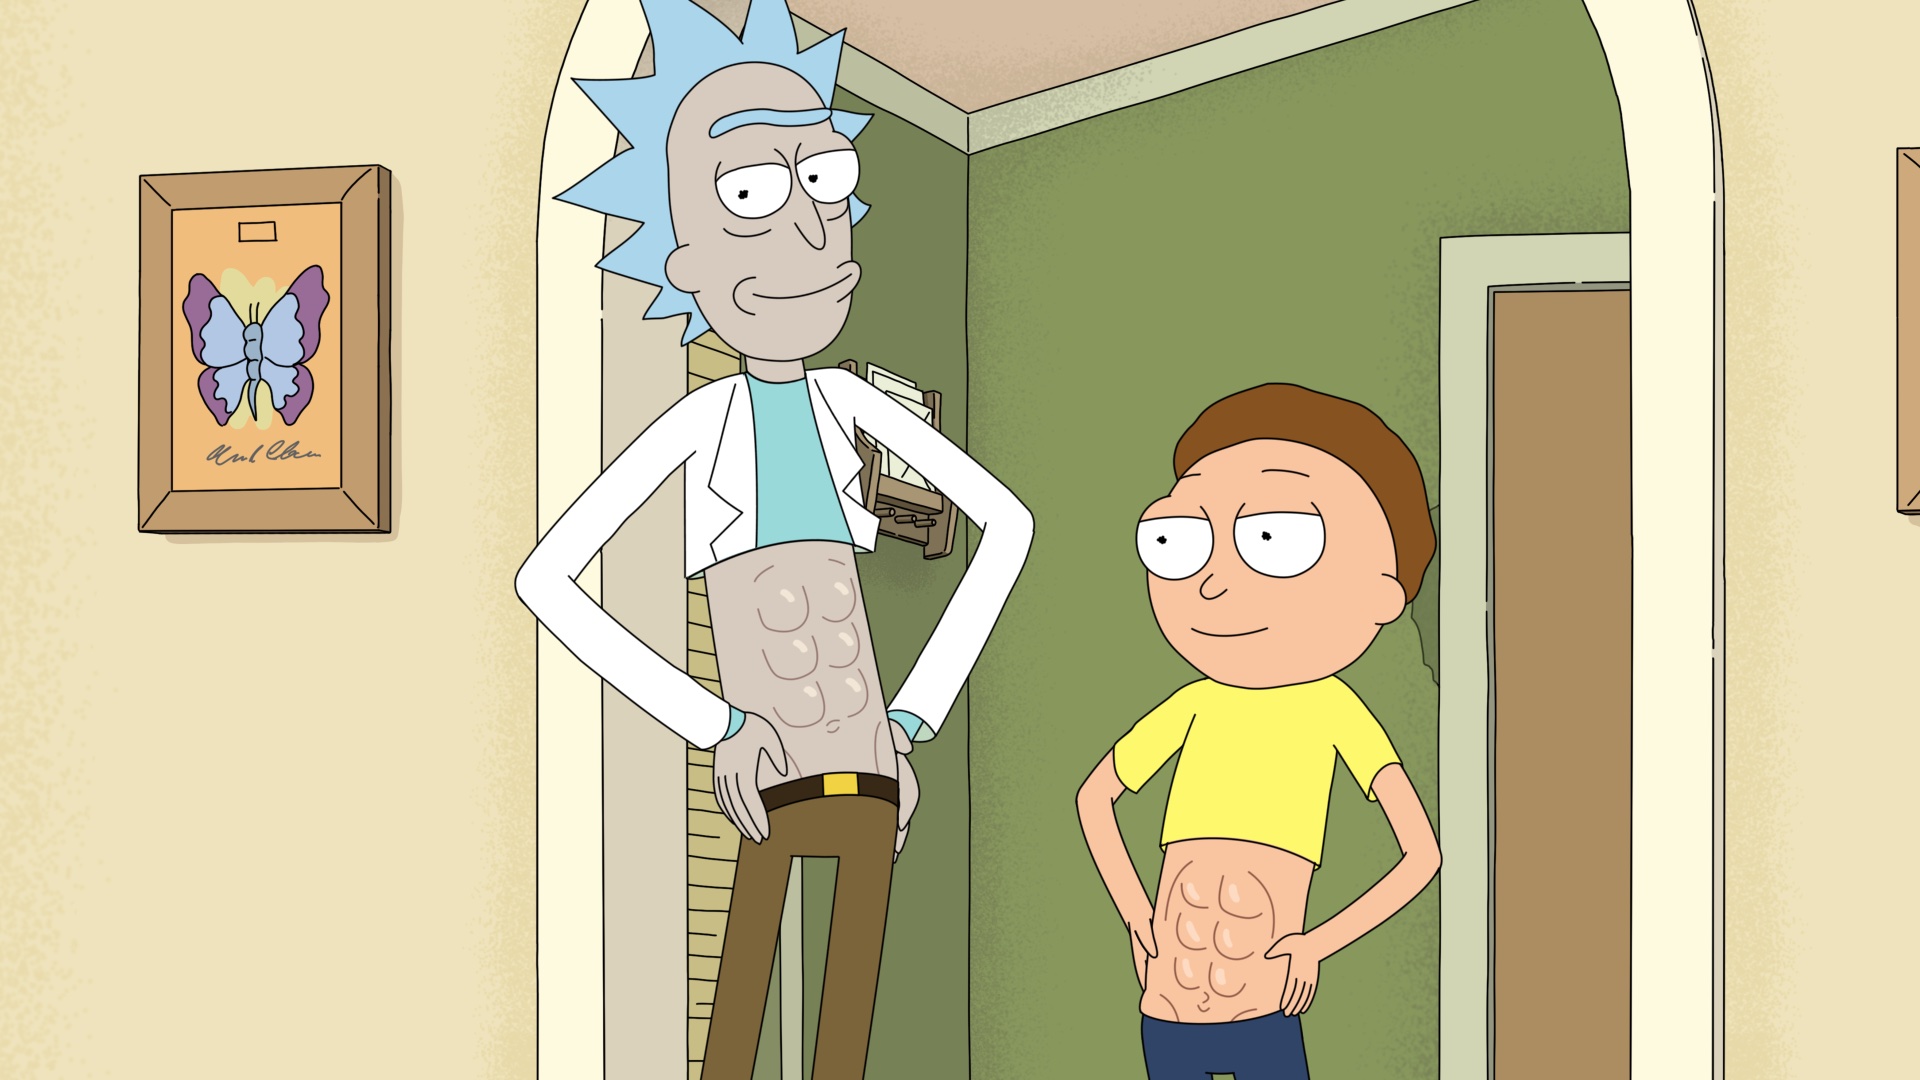 How to watch Rick and Morty season 6 online and stream the final